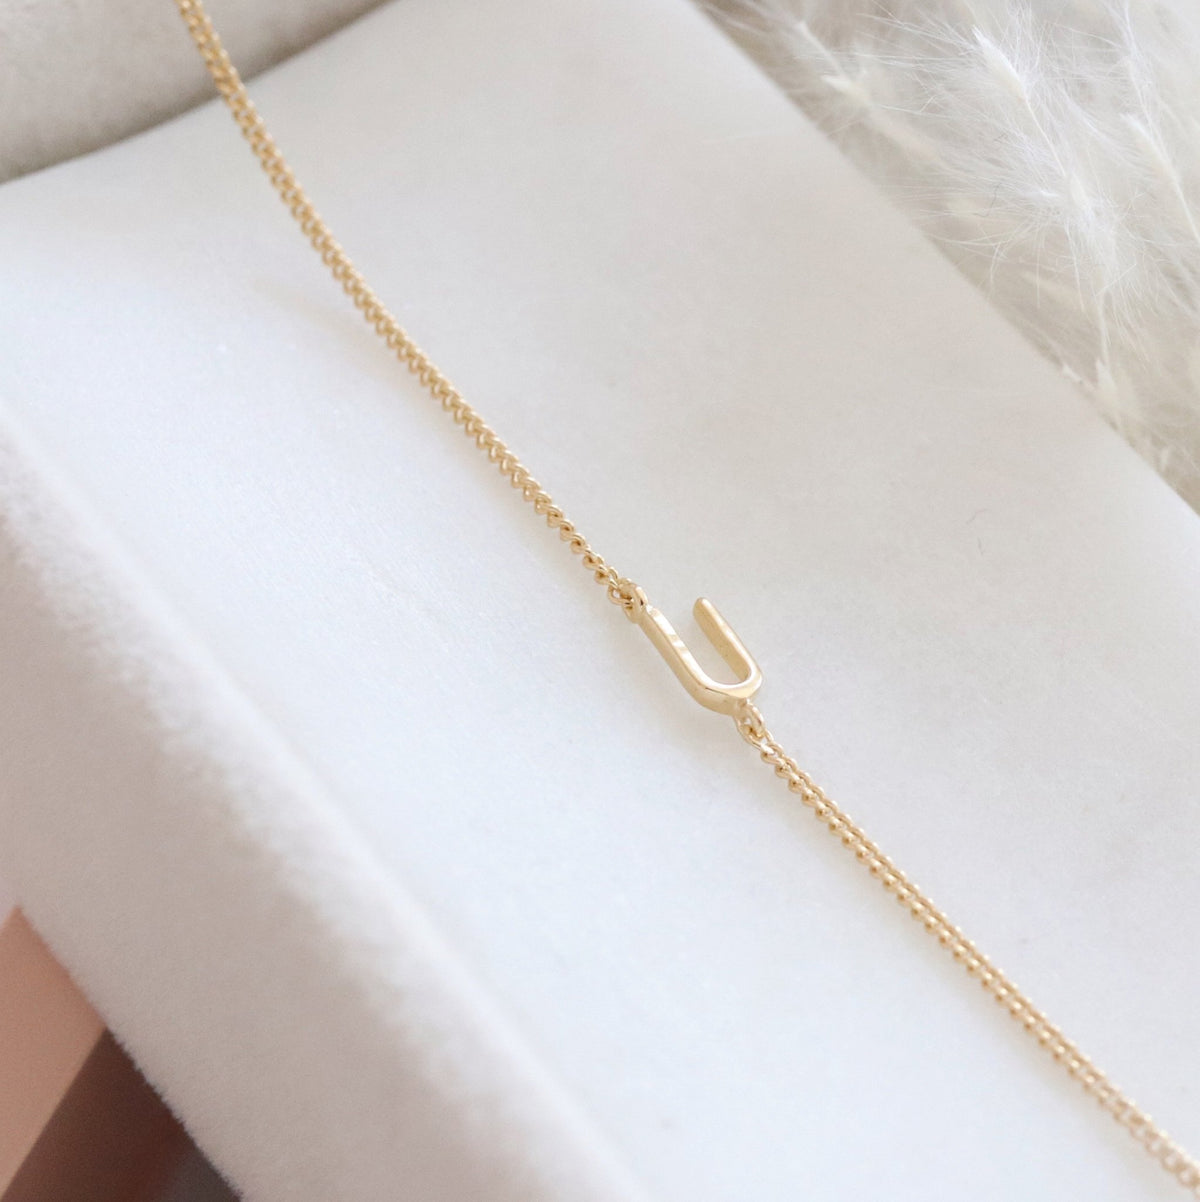 NOTABLE OFFSET INITIAL NECKLACE - U - GOLD - SO PRETTY CARA COTTER